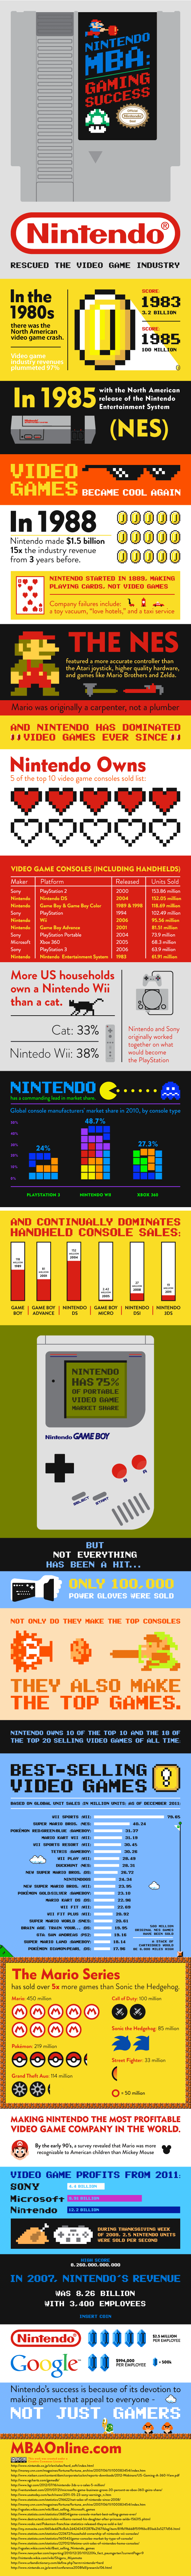 How Nintendo Saved The Geek Lifestyle [Infographic]